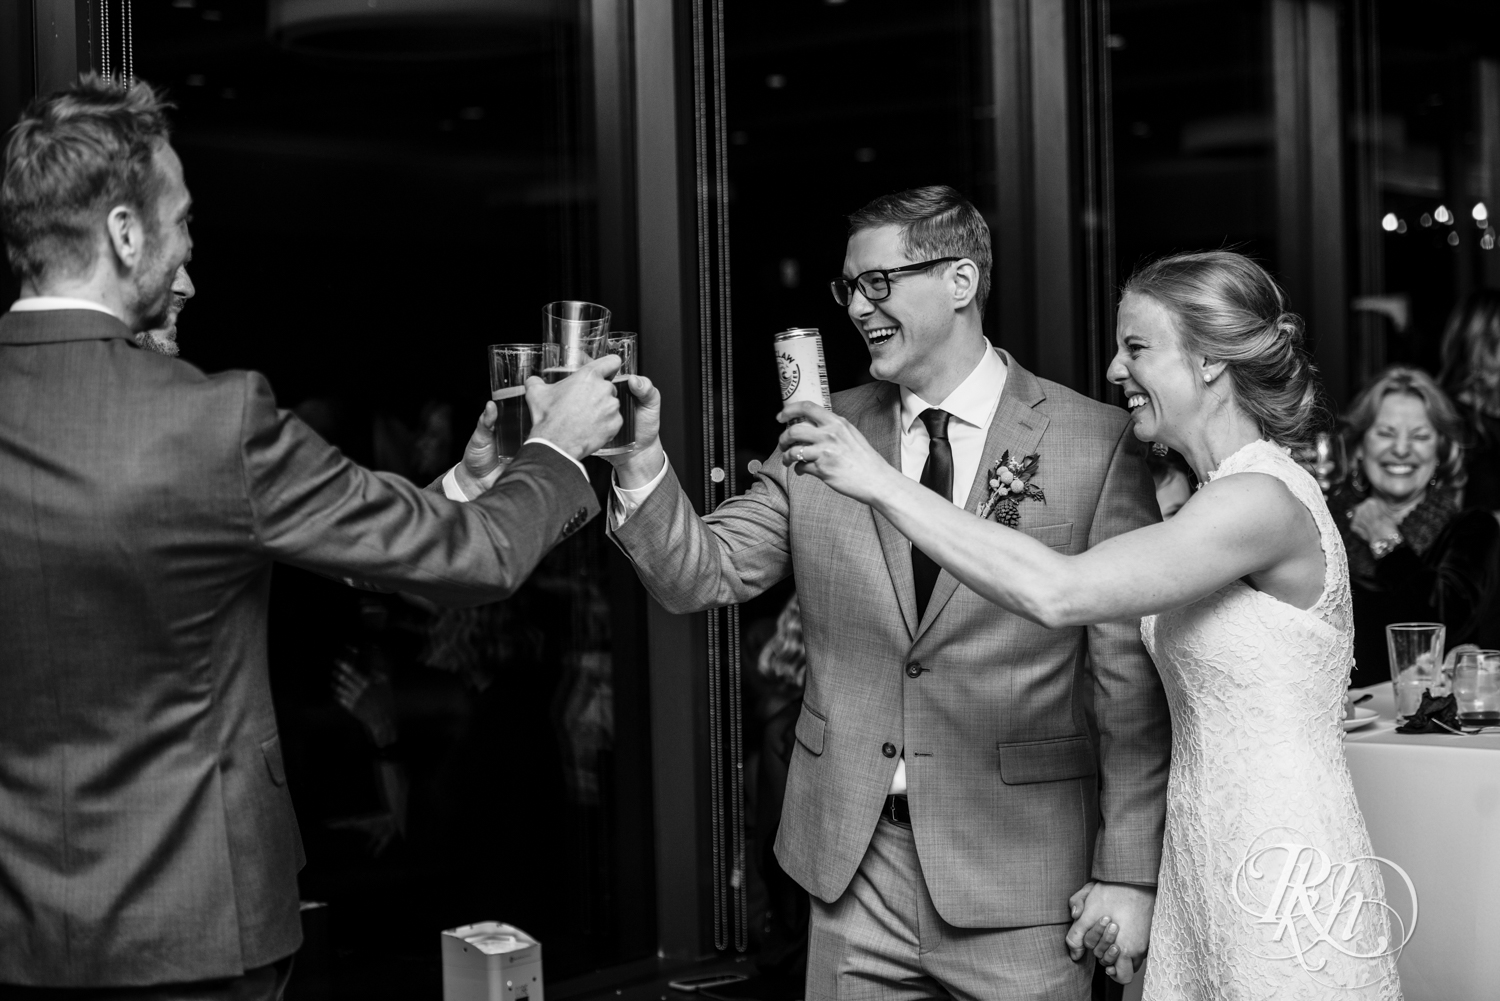 Bride and groom toast at wedding reception at Brookview Golf Course in Golden Valley, Minnesota.